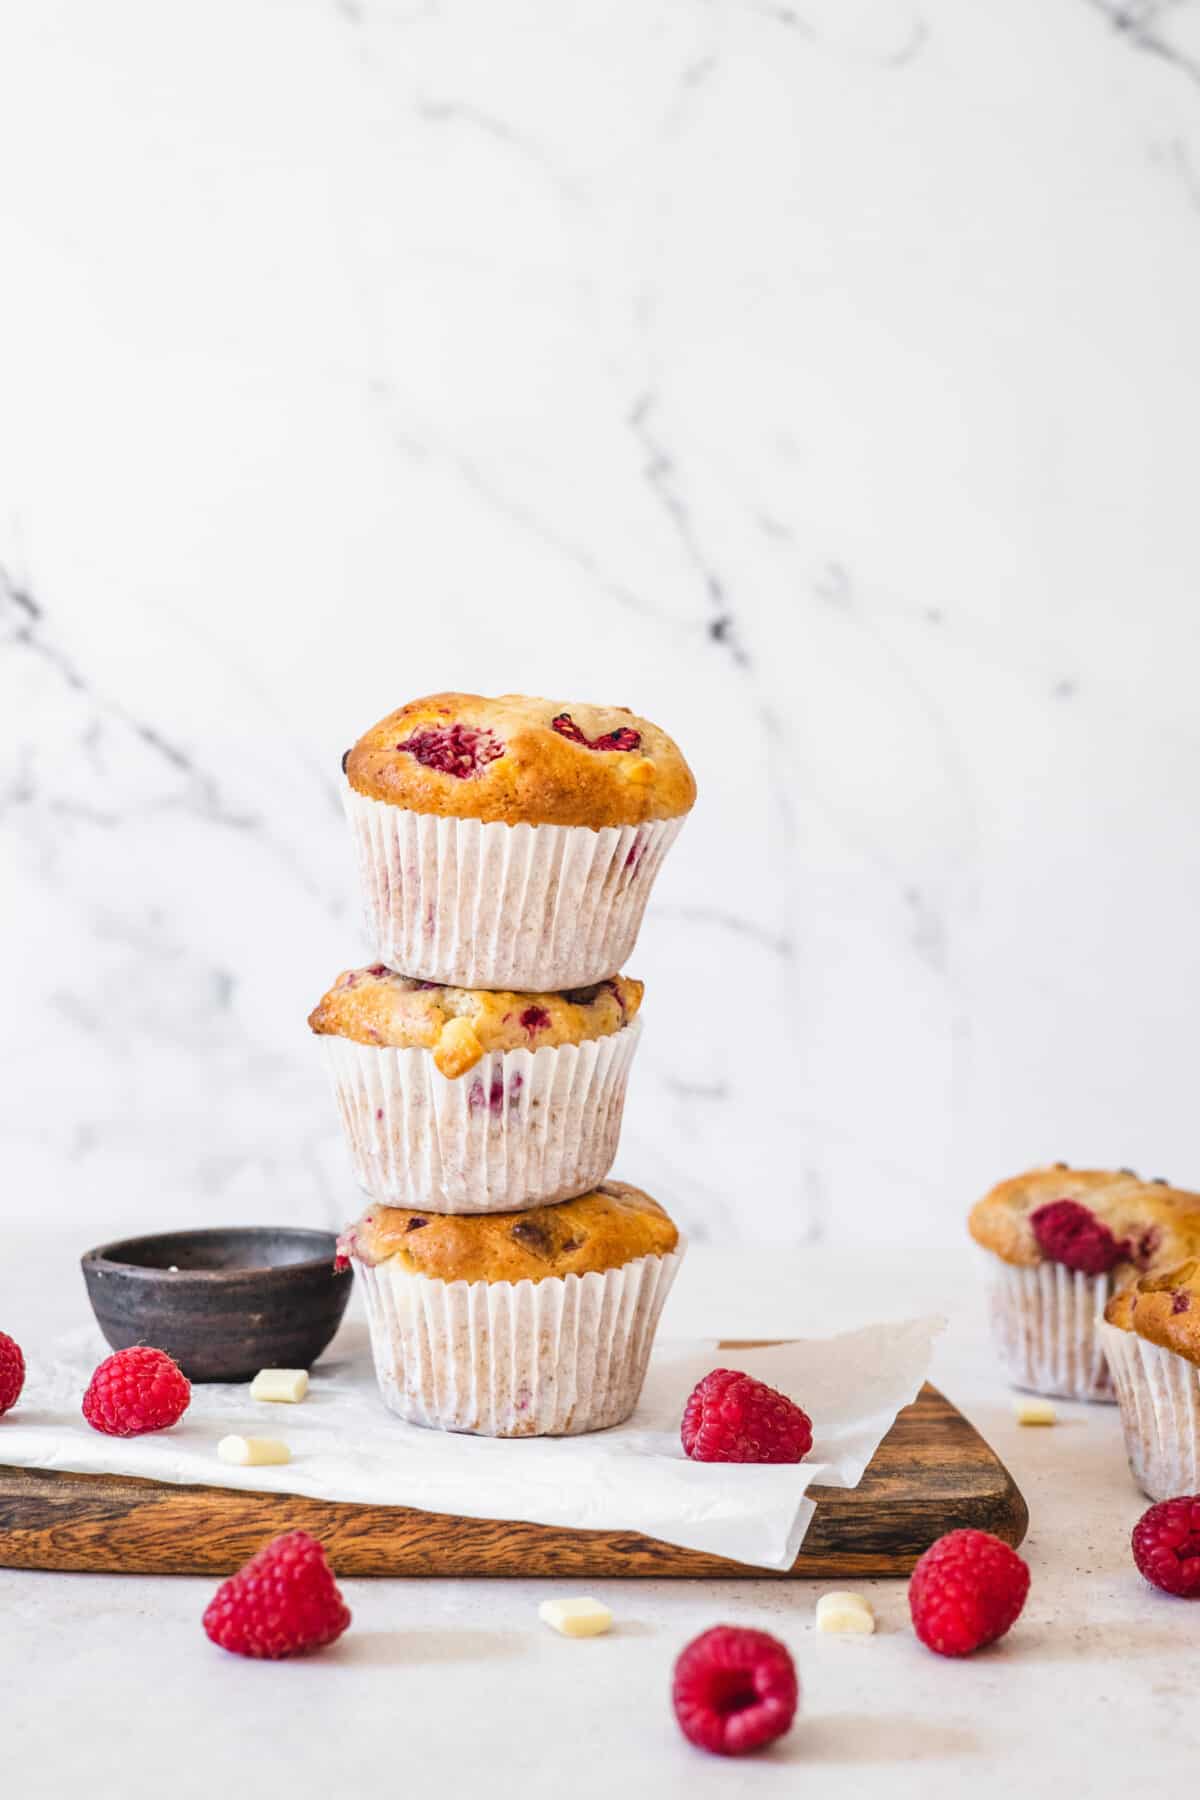 A stack of 3 white chocolate raspberry muffins.